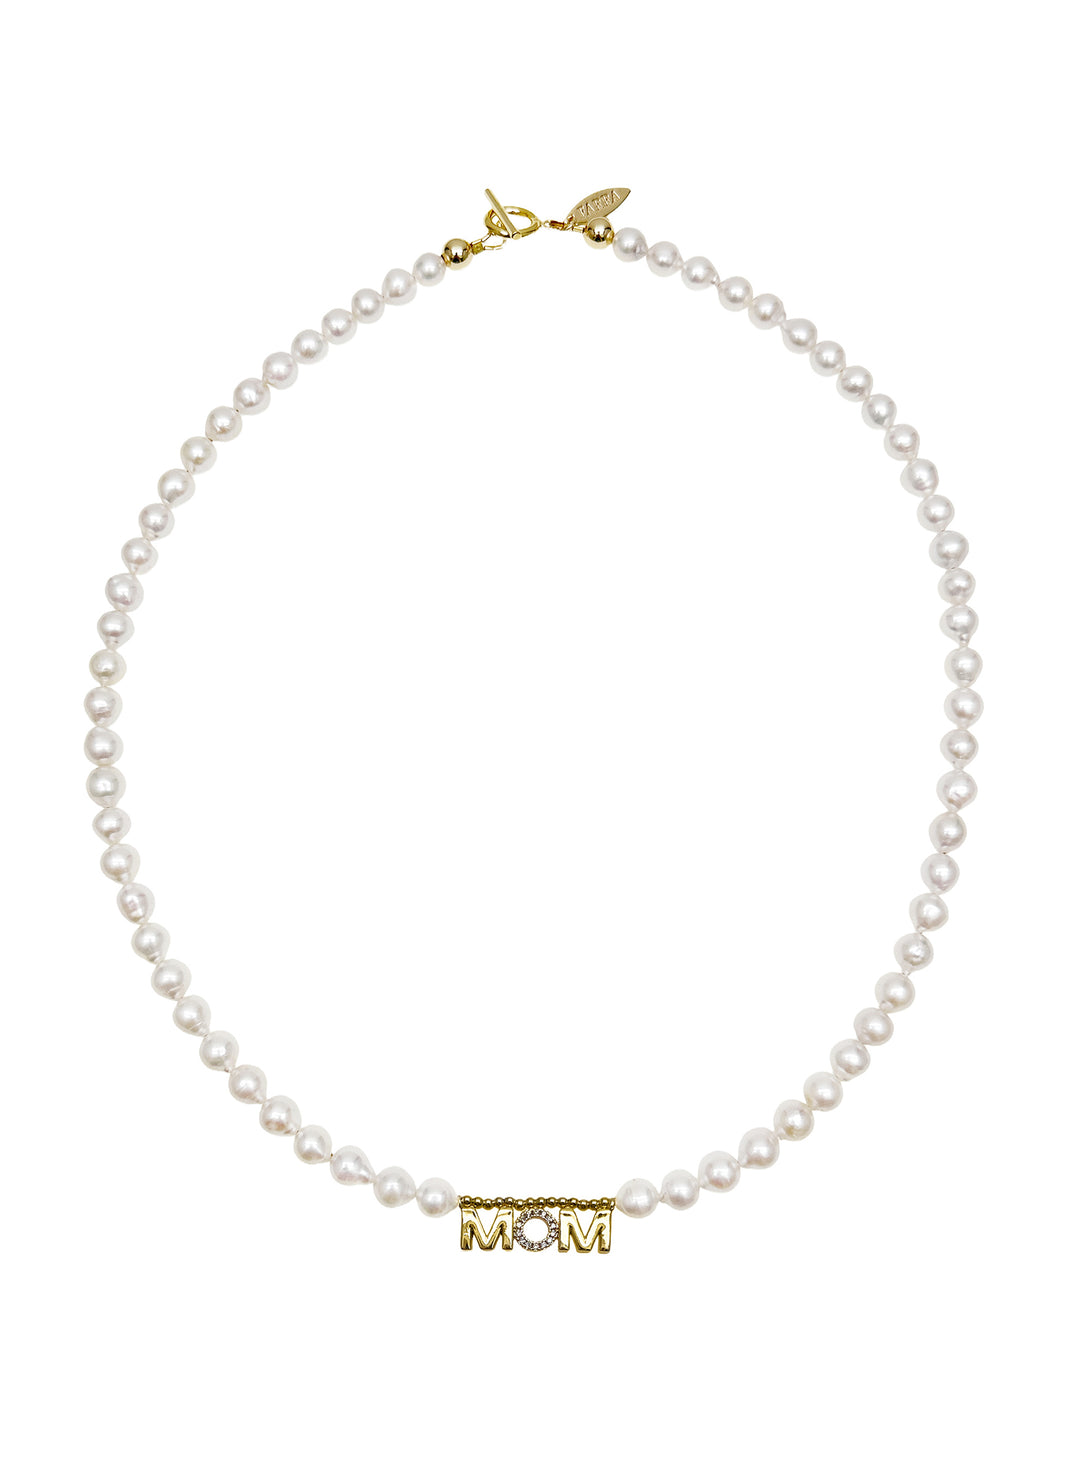 Freshwater Pearls with MOM Pendant Necklace LN060 - FARRA